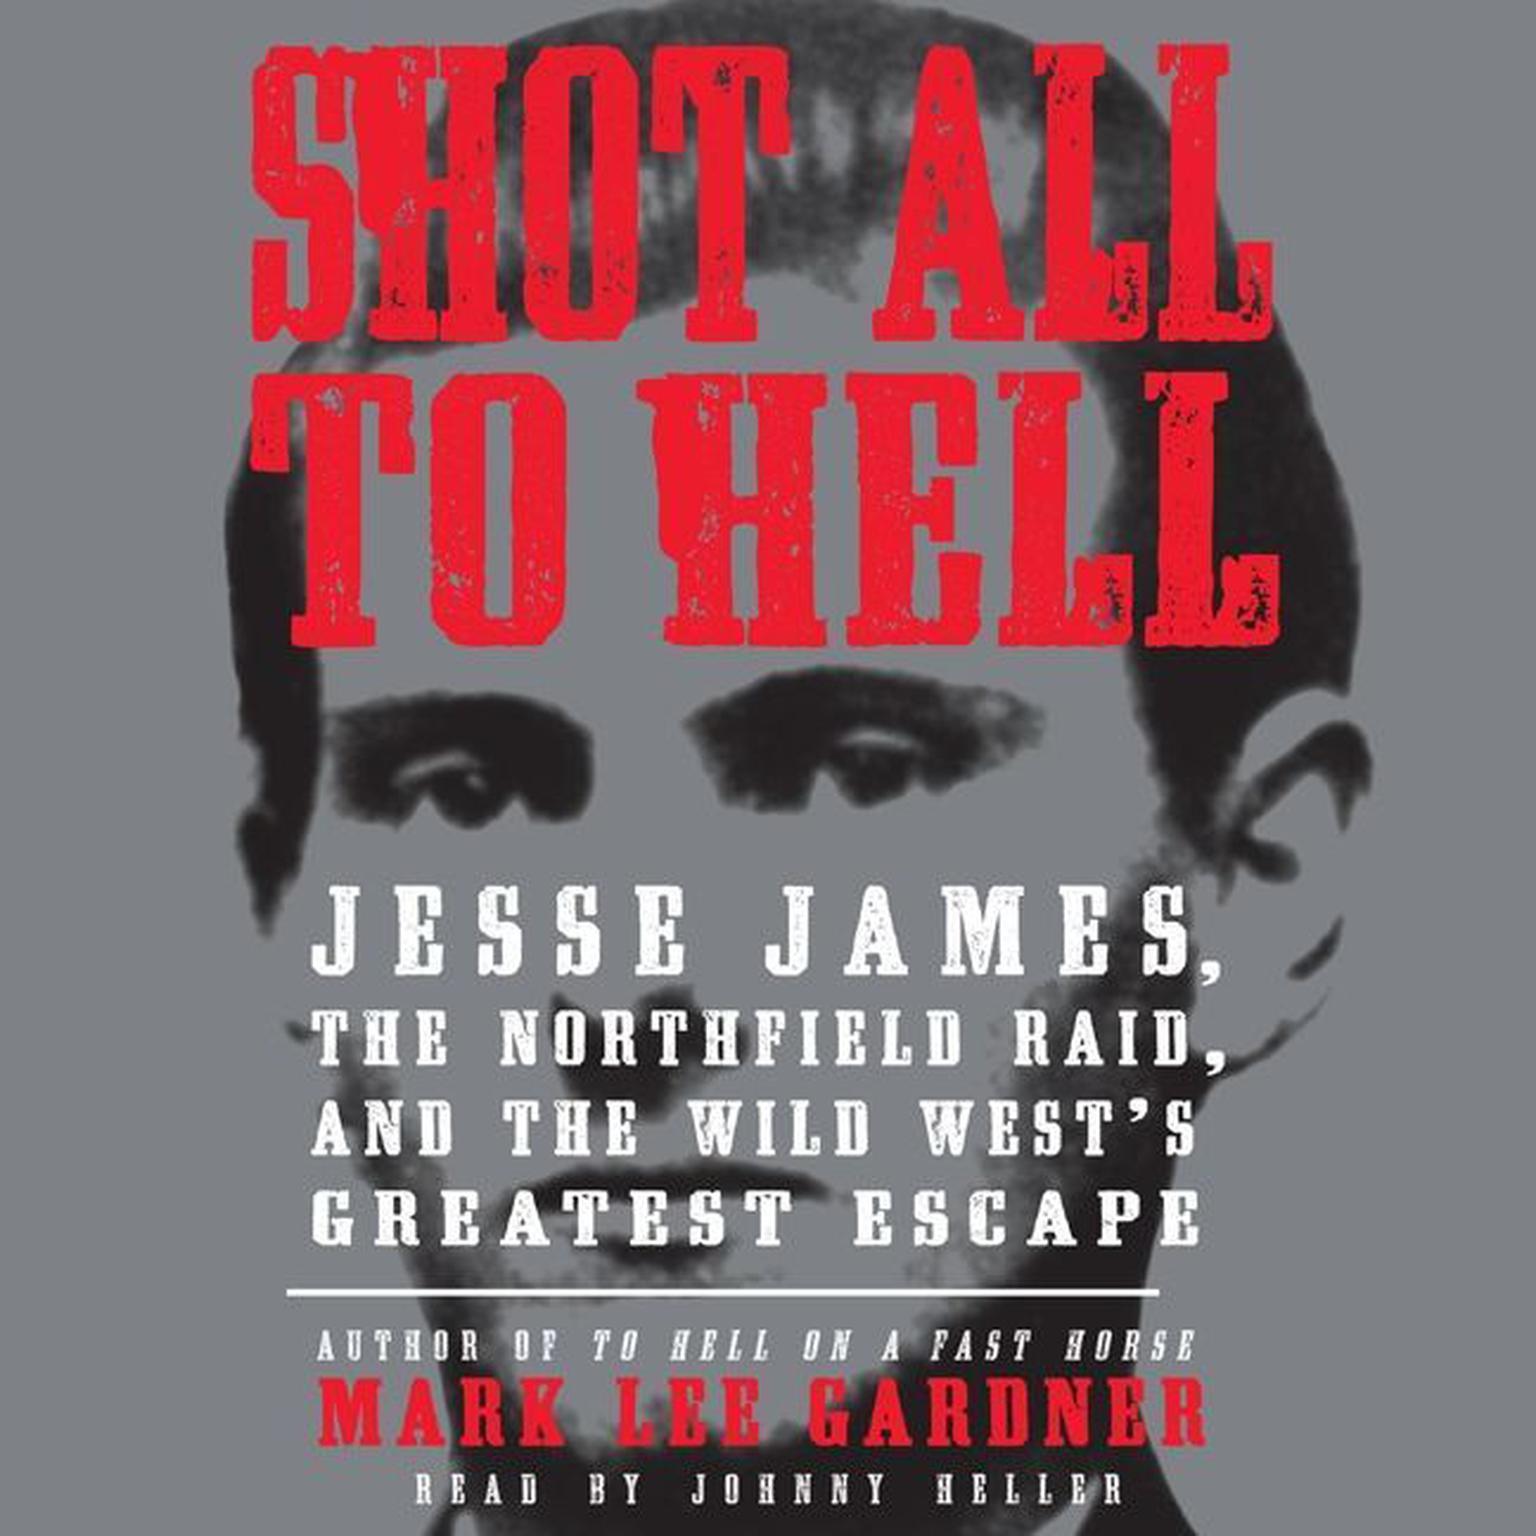 Shot All to Hell: Jesse James, the Northfield Raid, and the Wild Wests Greatest Escape Audiobook, by Mark Lee Gardner